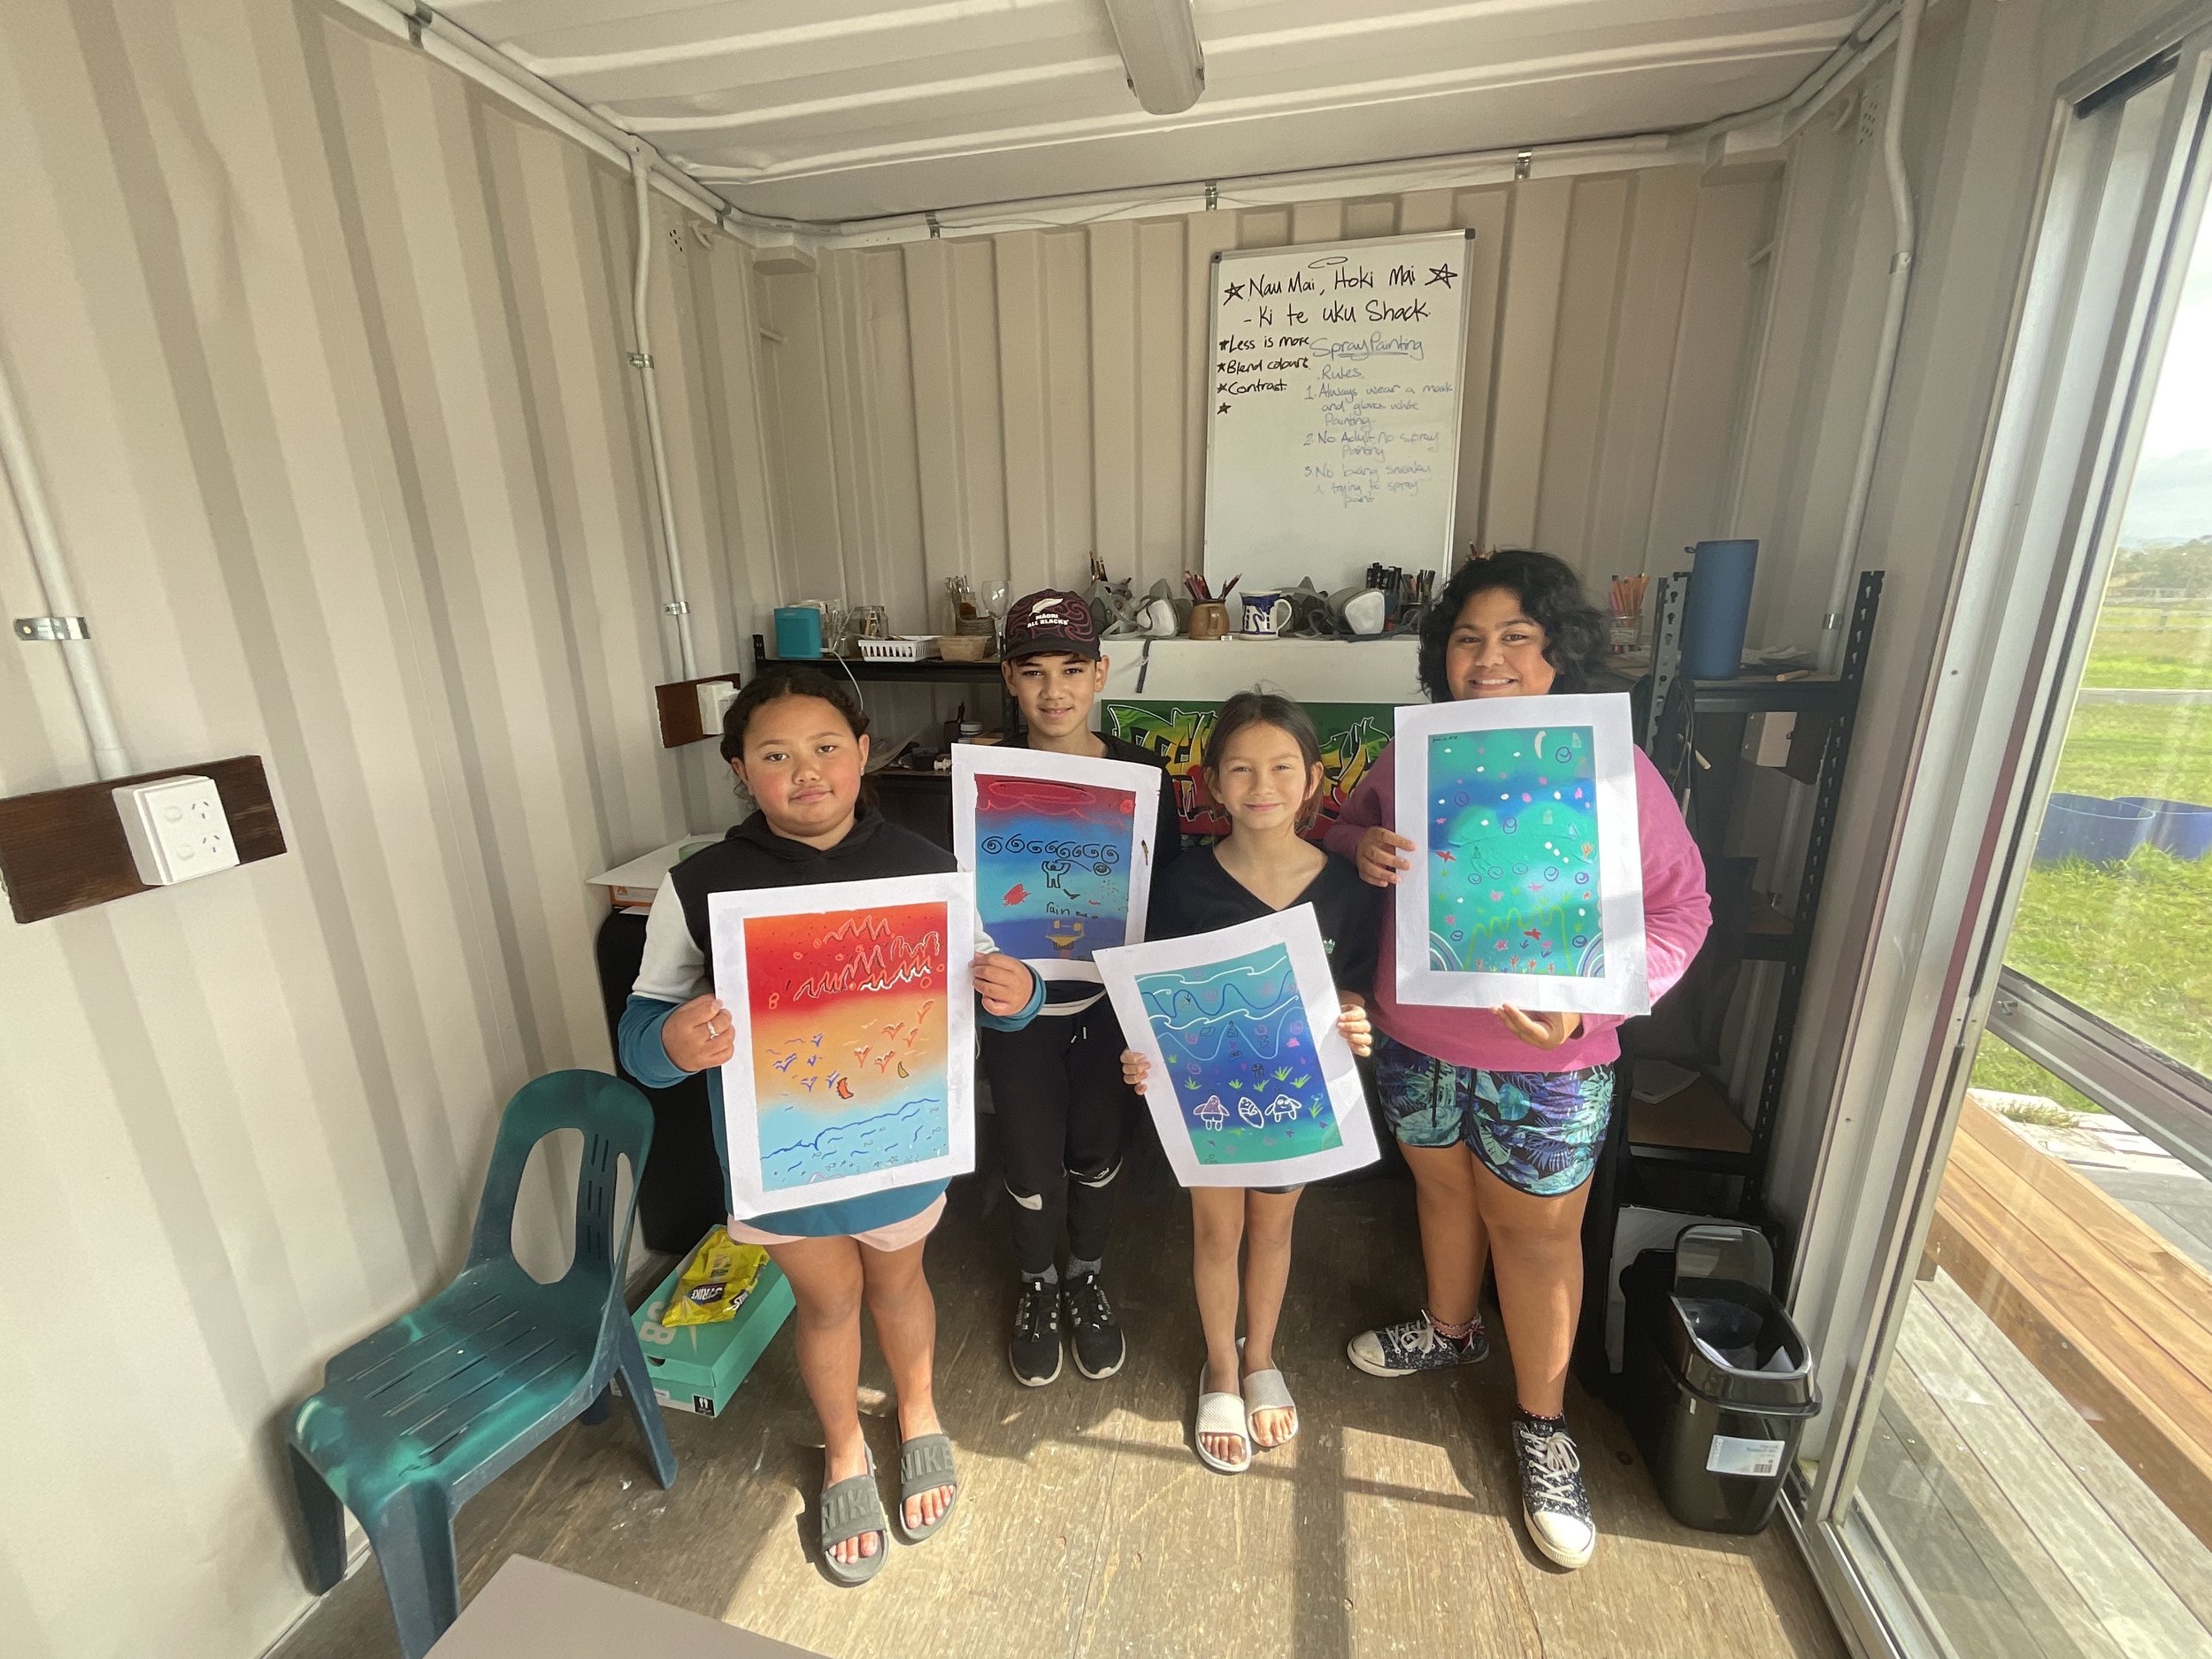   Multimedia workshops for tamariki from Ruakaka Primary at the Uku Shack in Takahiwai. These workshops aimed to offer our tamariki the opportunity to create their own unique art pieces, using modern-day resources such as spray cans.  